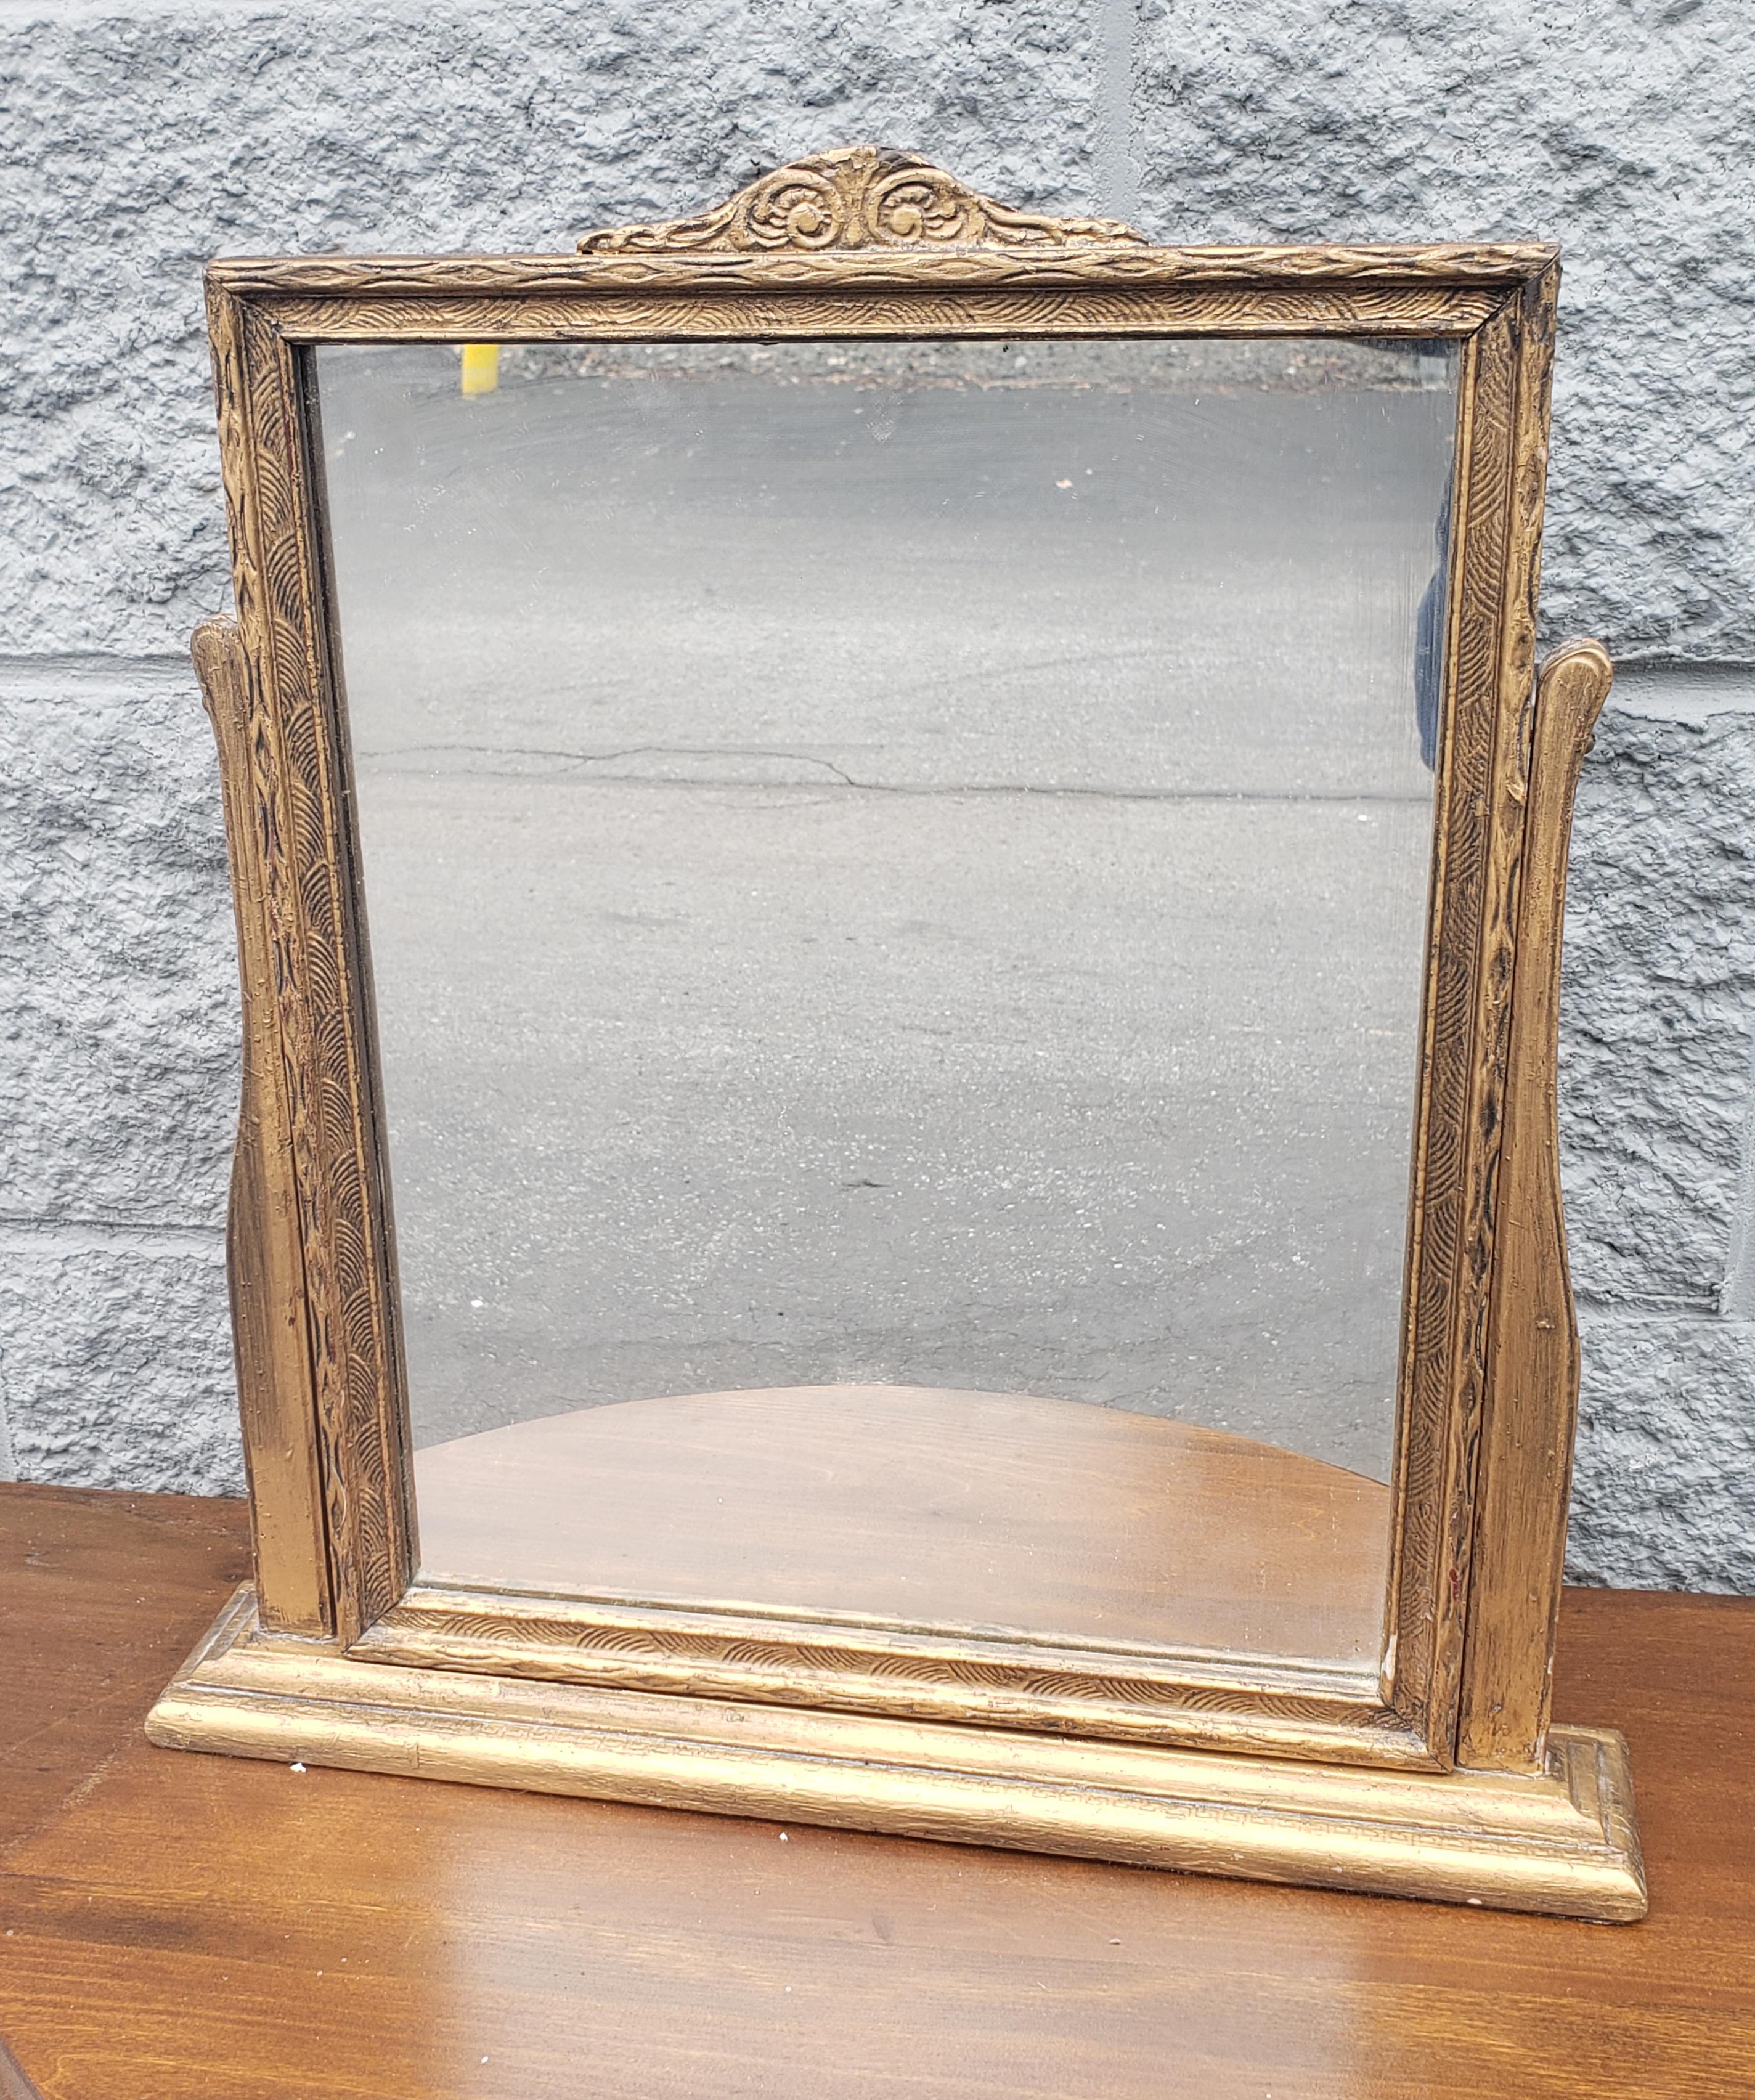 Exquisite art deco giltwood self standing table mirror.
Very Good Vintage condition with appropriate with use and history


W5.